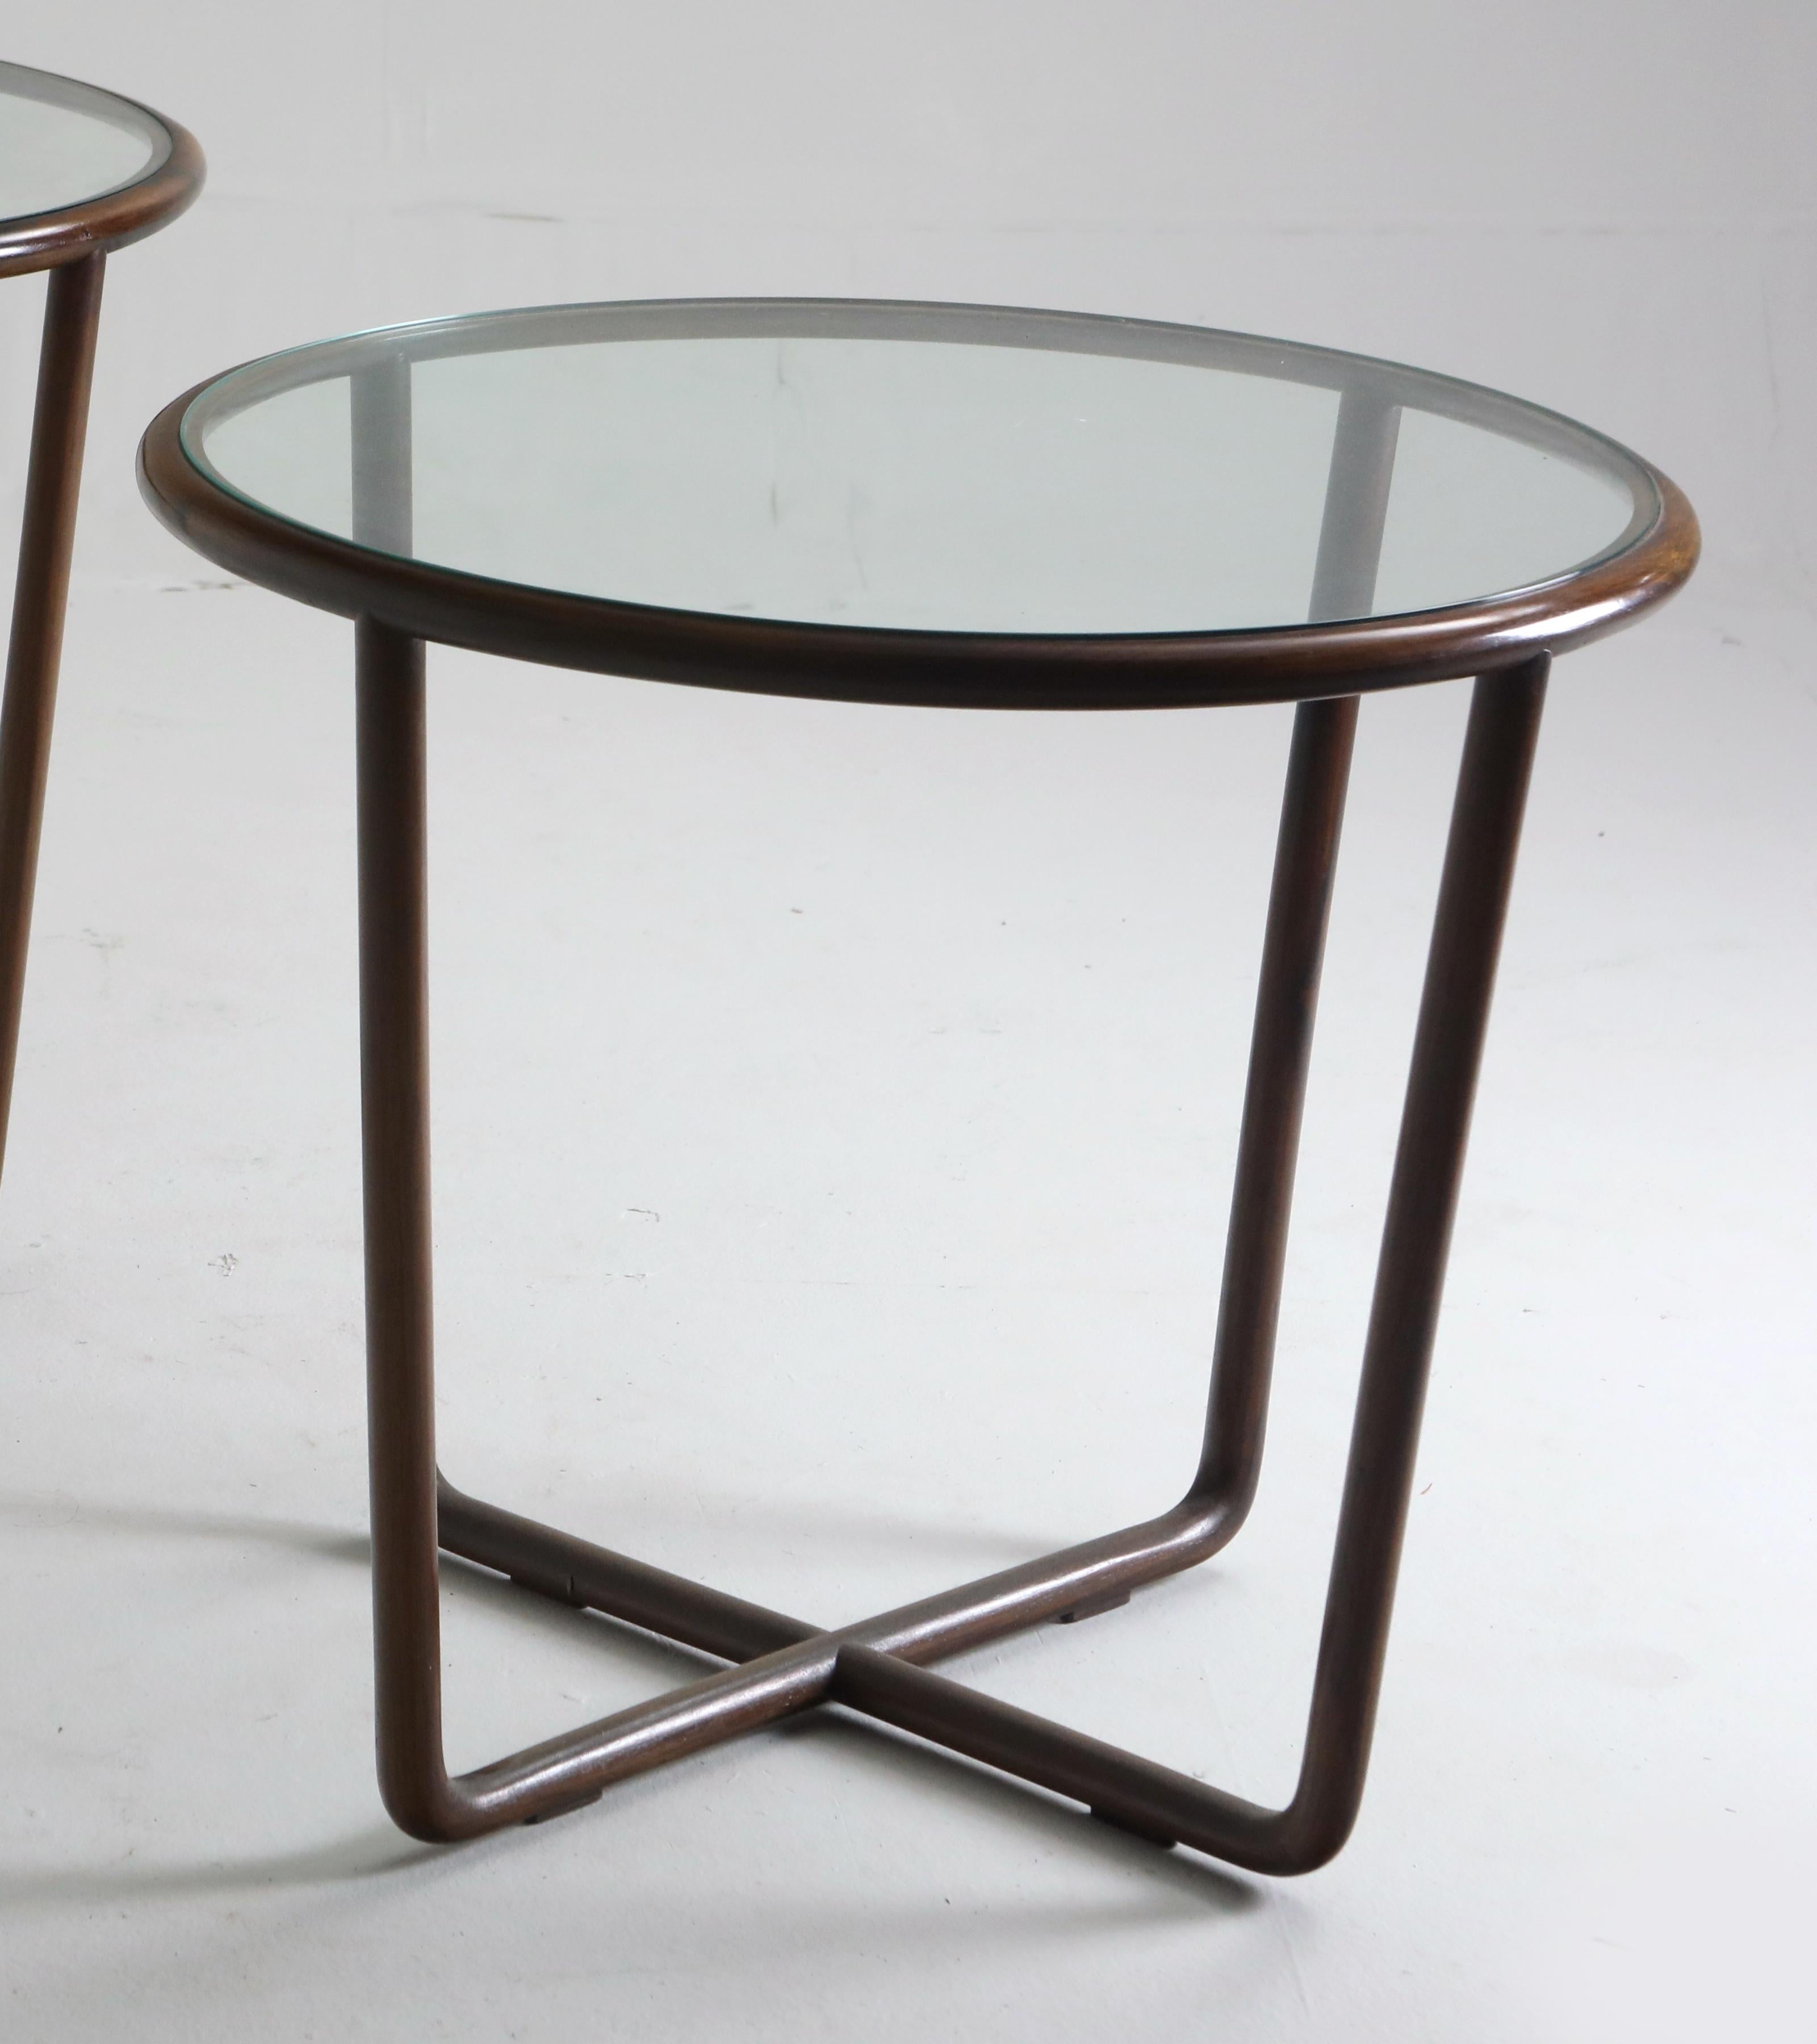 Mid-Century Modern side table in wood and round glass top designed by Joaquim Tenreiro in 1950s.